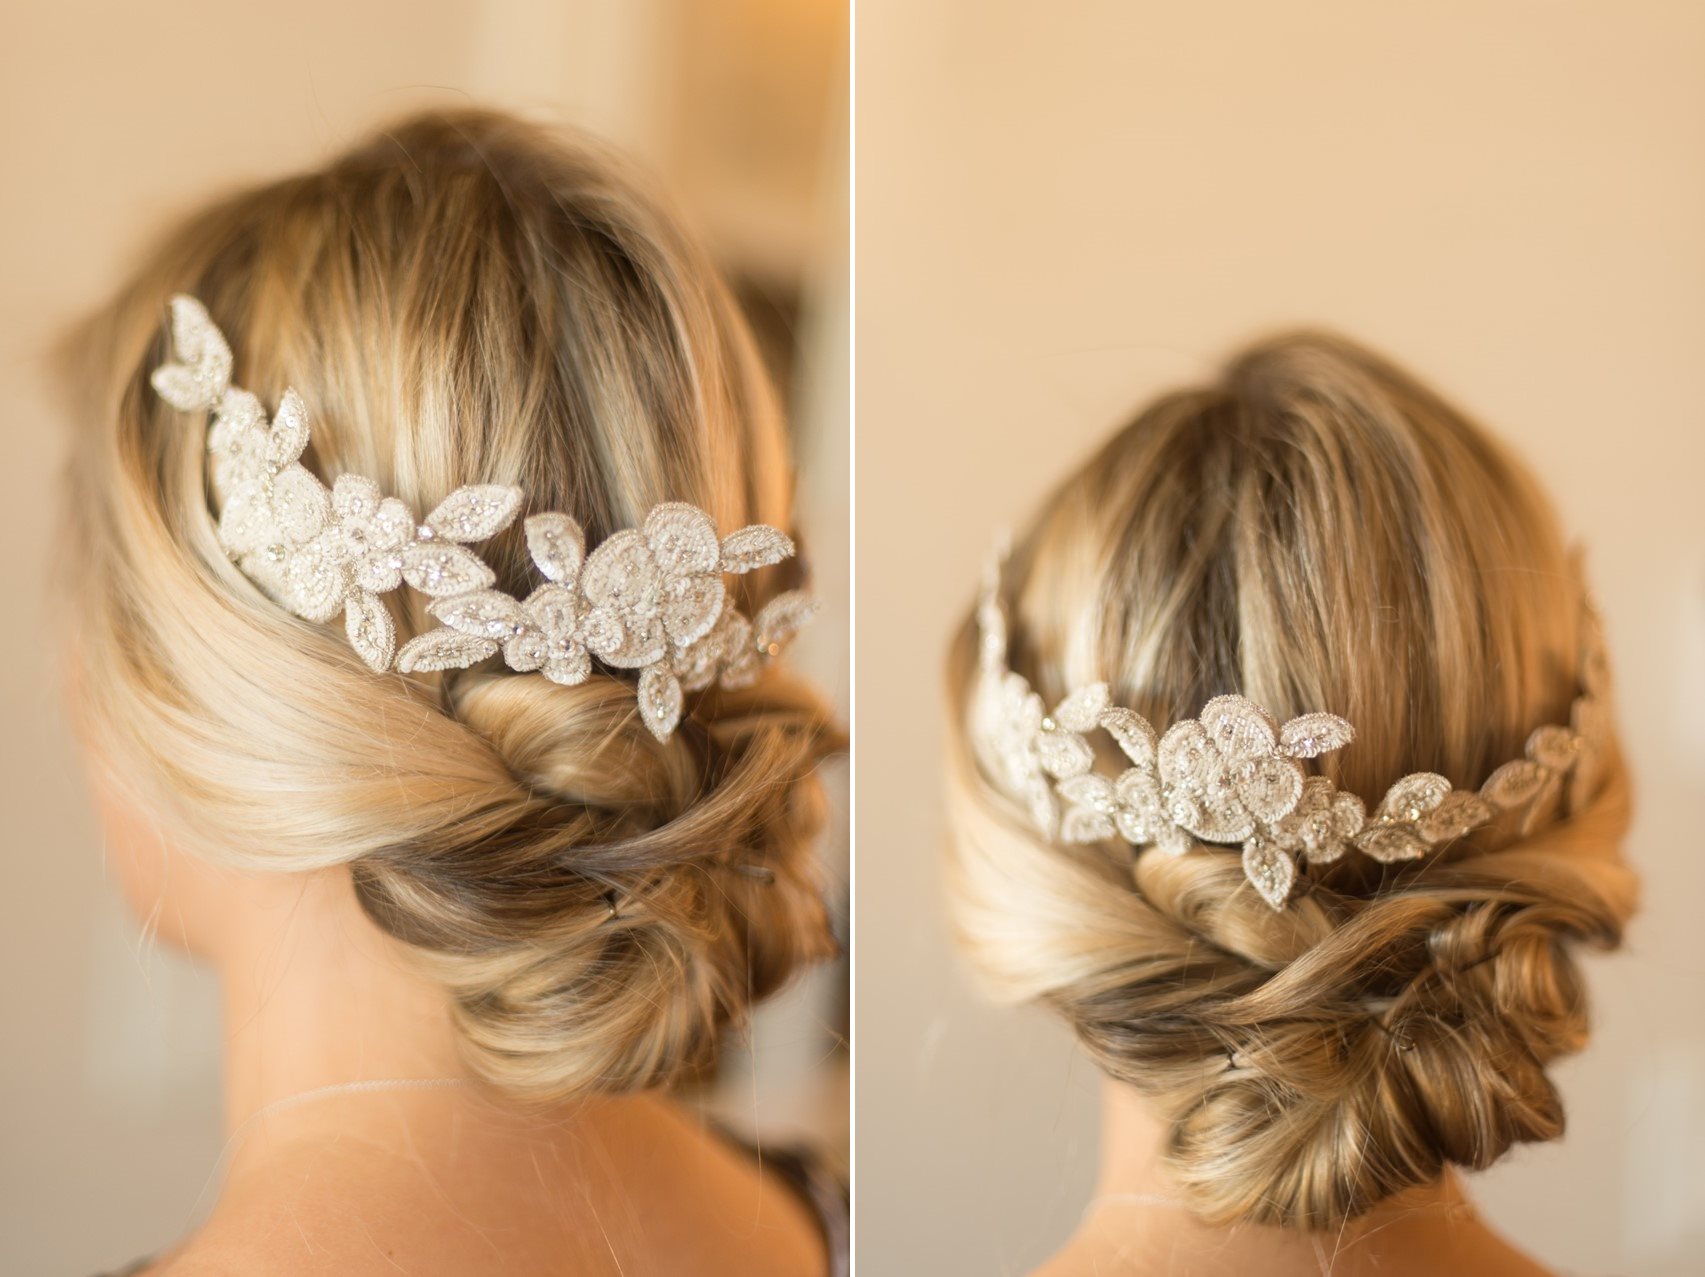 Bridal Hair Accessories from Emmy London